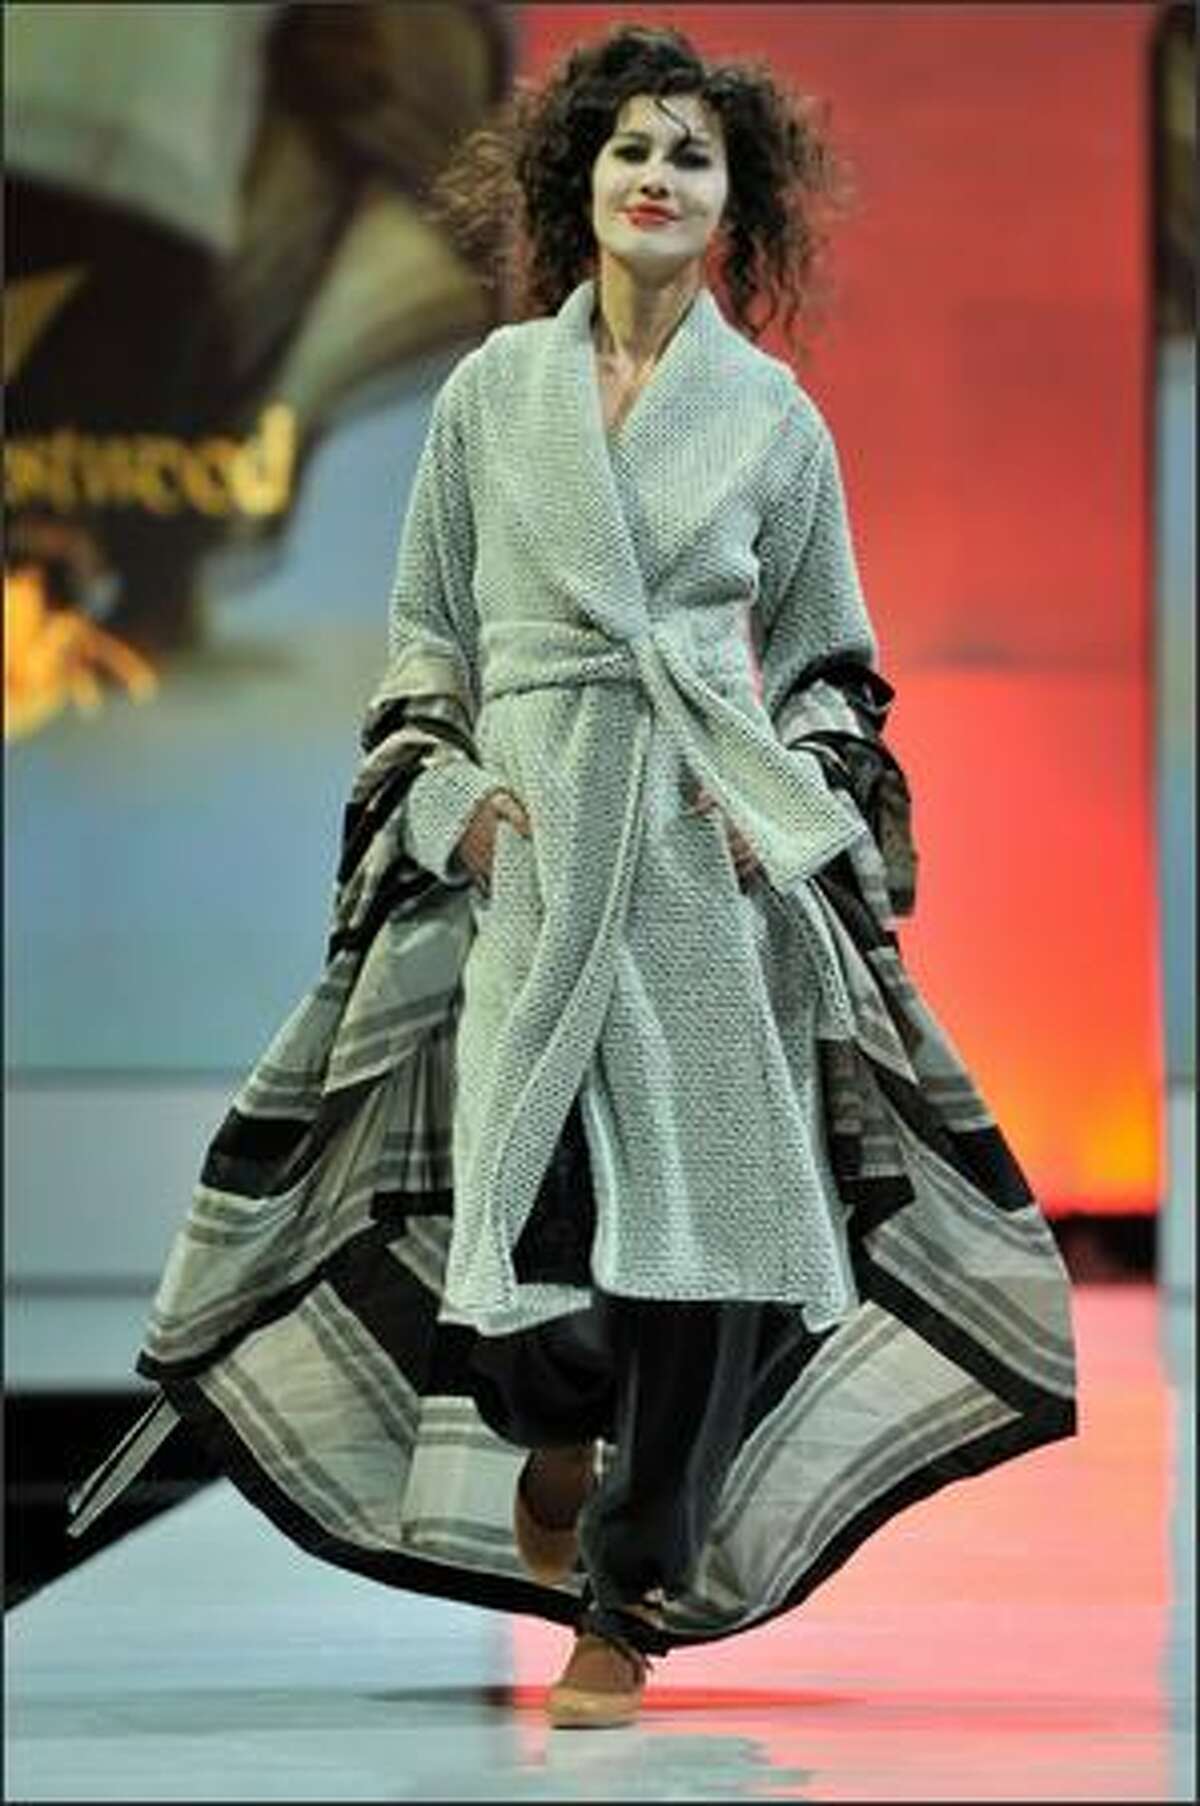 A model showcases designs by Vivienne Westwood for her Autumn/Winter 2009 collection on the catwalk at the Ngee Ann City Civic Plaza on Day 5 - and the last day - of the Audi Fashion Festival Singapore on Sunday in Singapore.